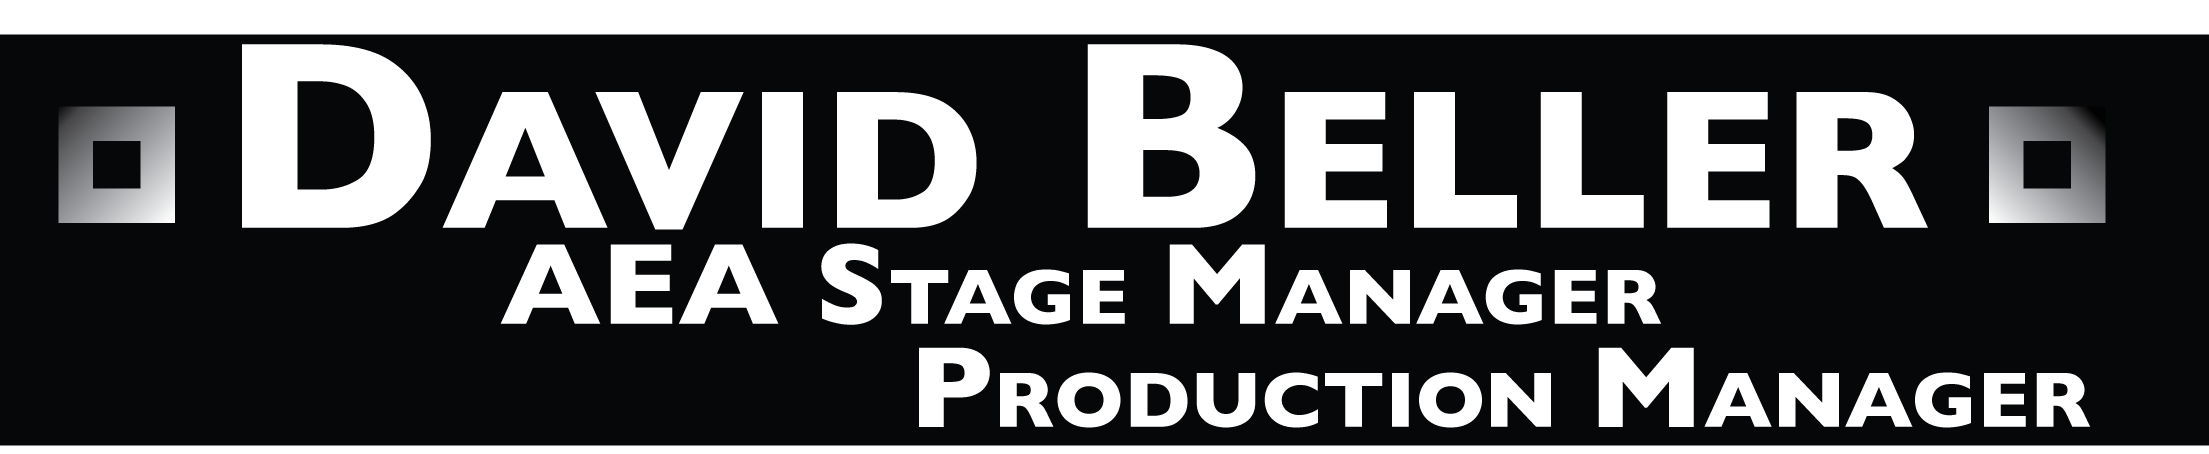 David Beller - AEA Stage Manager & Production Manager | 